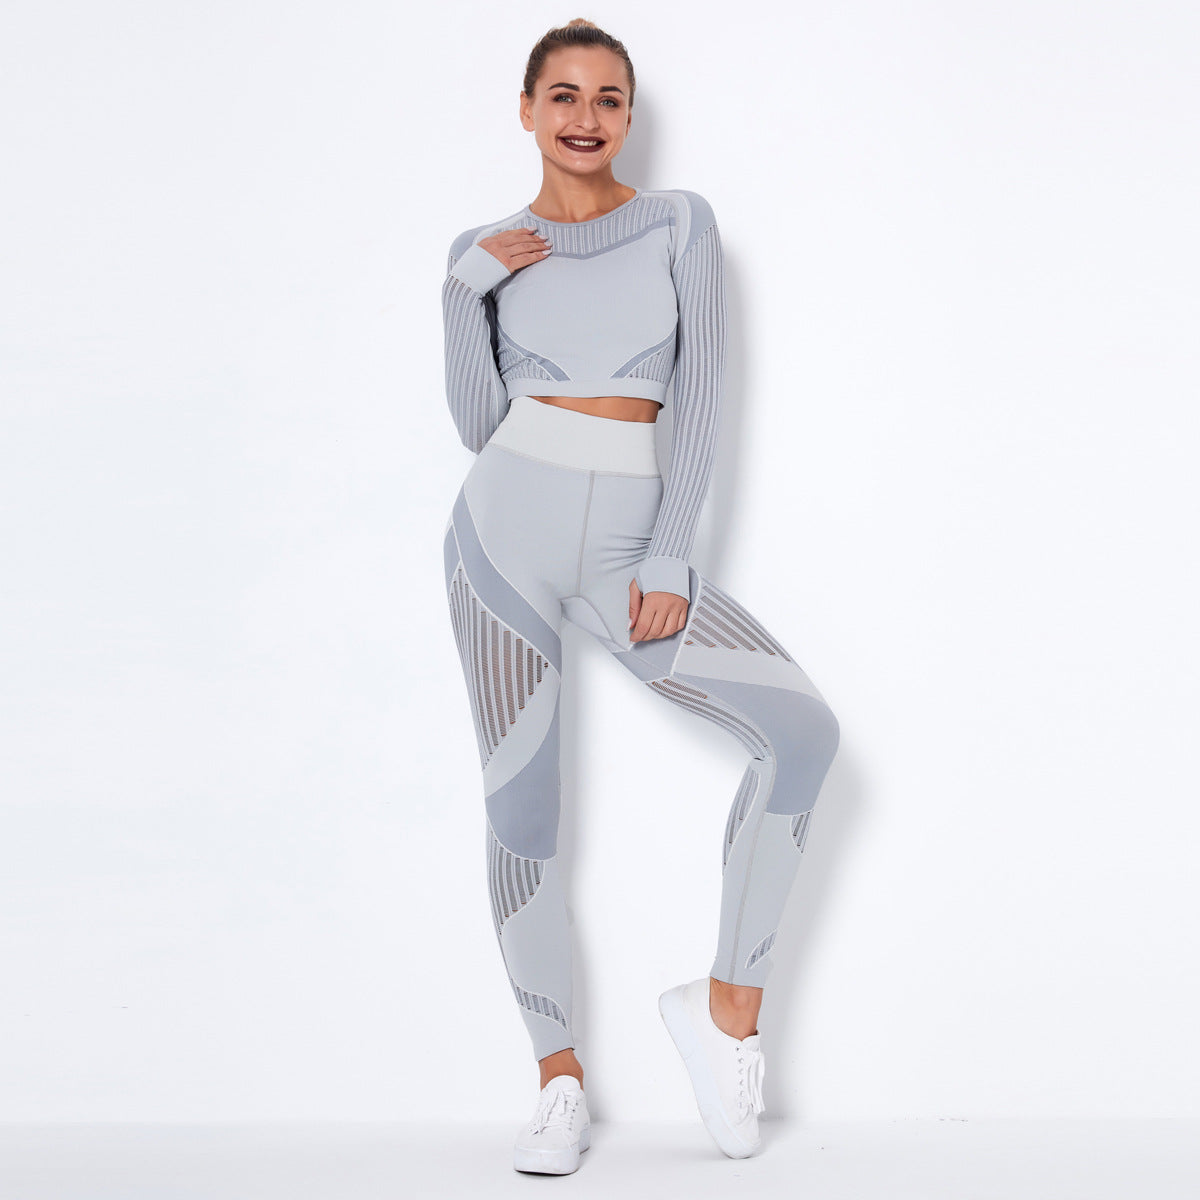 New  Seamless Net Hole Quick Drying Sports Yoga Long Sleeve Striped Fitness Trousers Yoga Suit